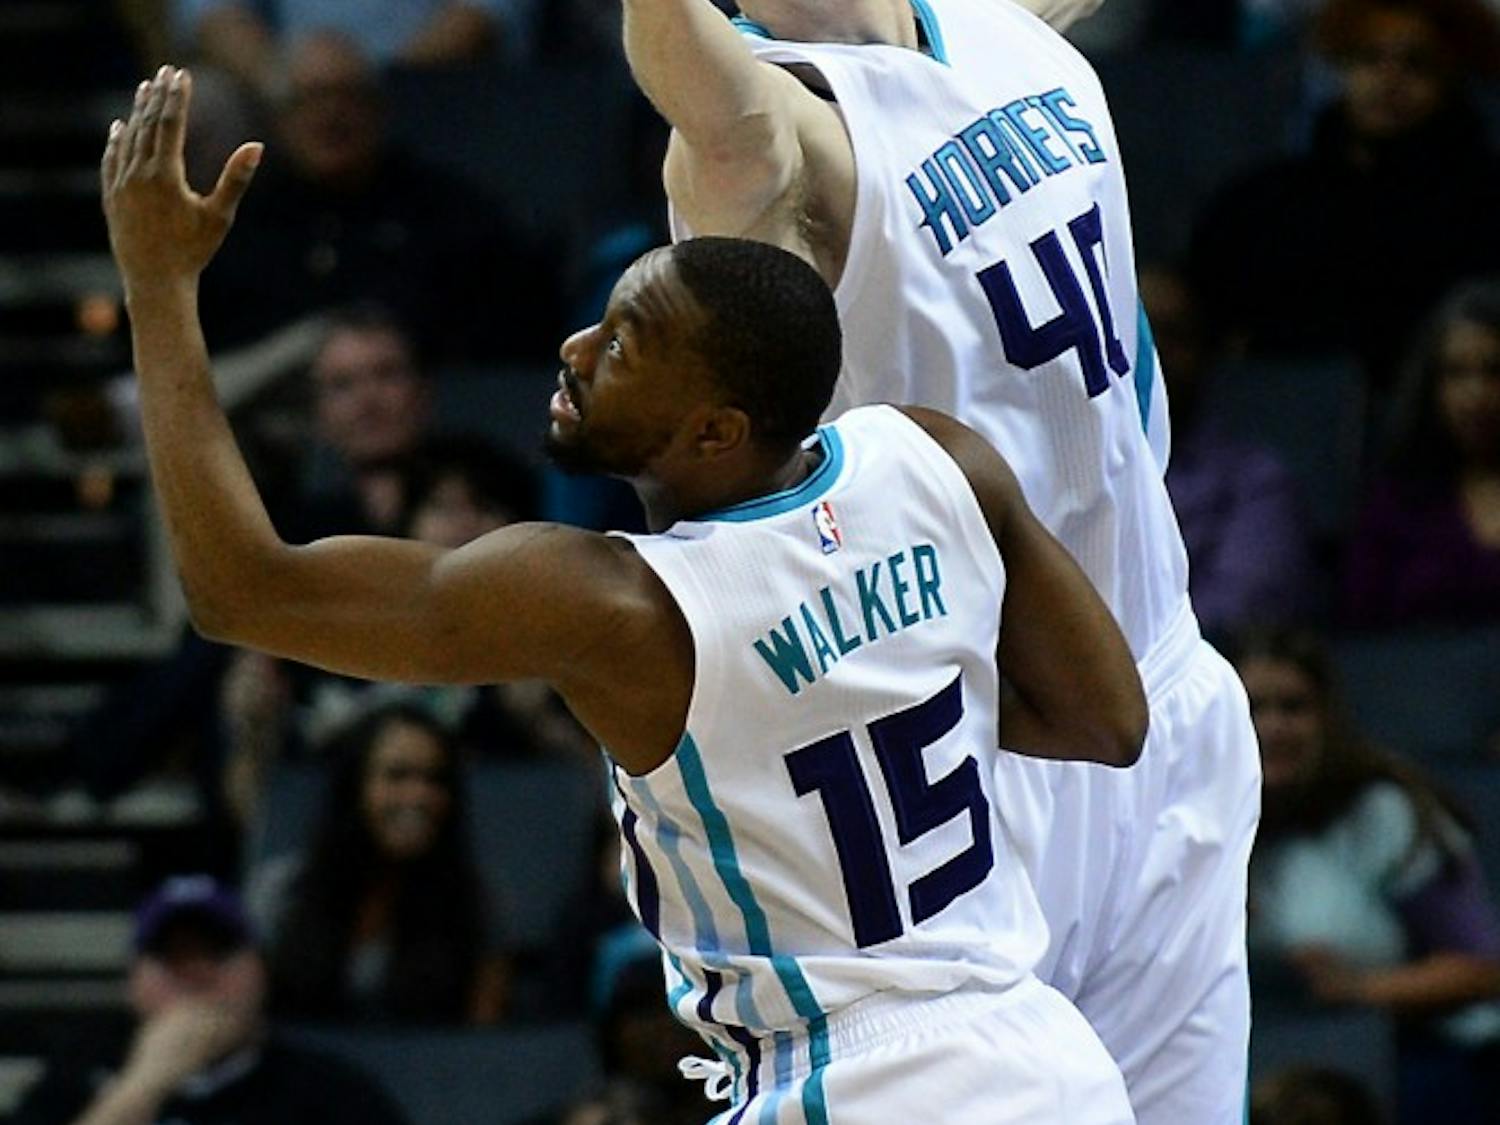 The Charlotte Hornets' Cody Zeller, top, fights for control of a rebound with teammate Kemba Walker (15) during first-half action against the Denver Nuggets on Friday, March 31, 2017, at the Spectrum Center in Charlotte, N.C. (Jeff Siner/Charlotte Observer/TNS)